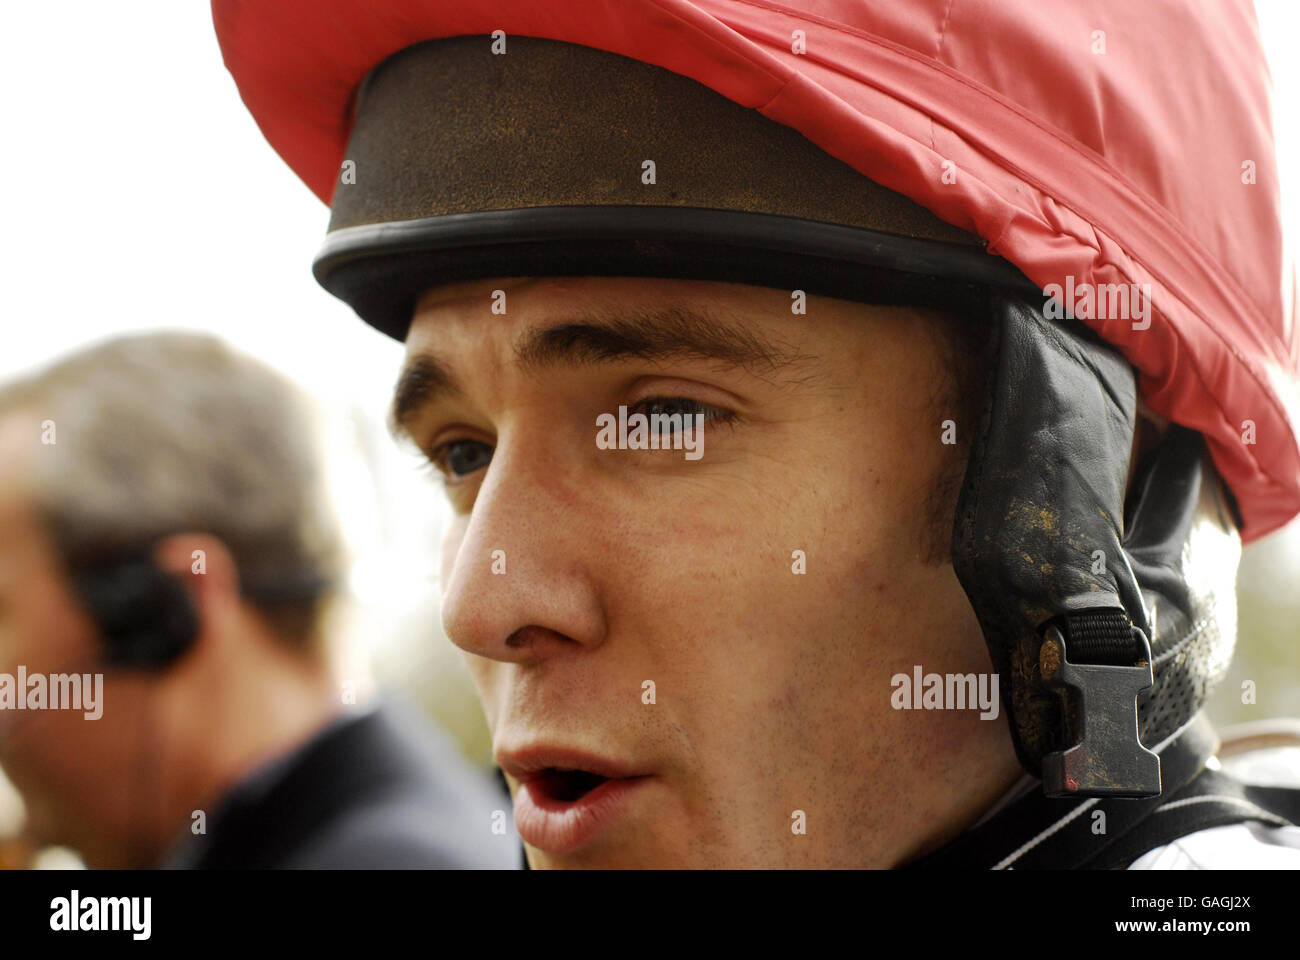 Horse Racing - Victor Chandler Day - Ascot Racecourse. Jockey Tom Scudamore after victory on Tamarinbleu in The Victor Chandler Chase at Ascot Racecourse. Stock Photo